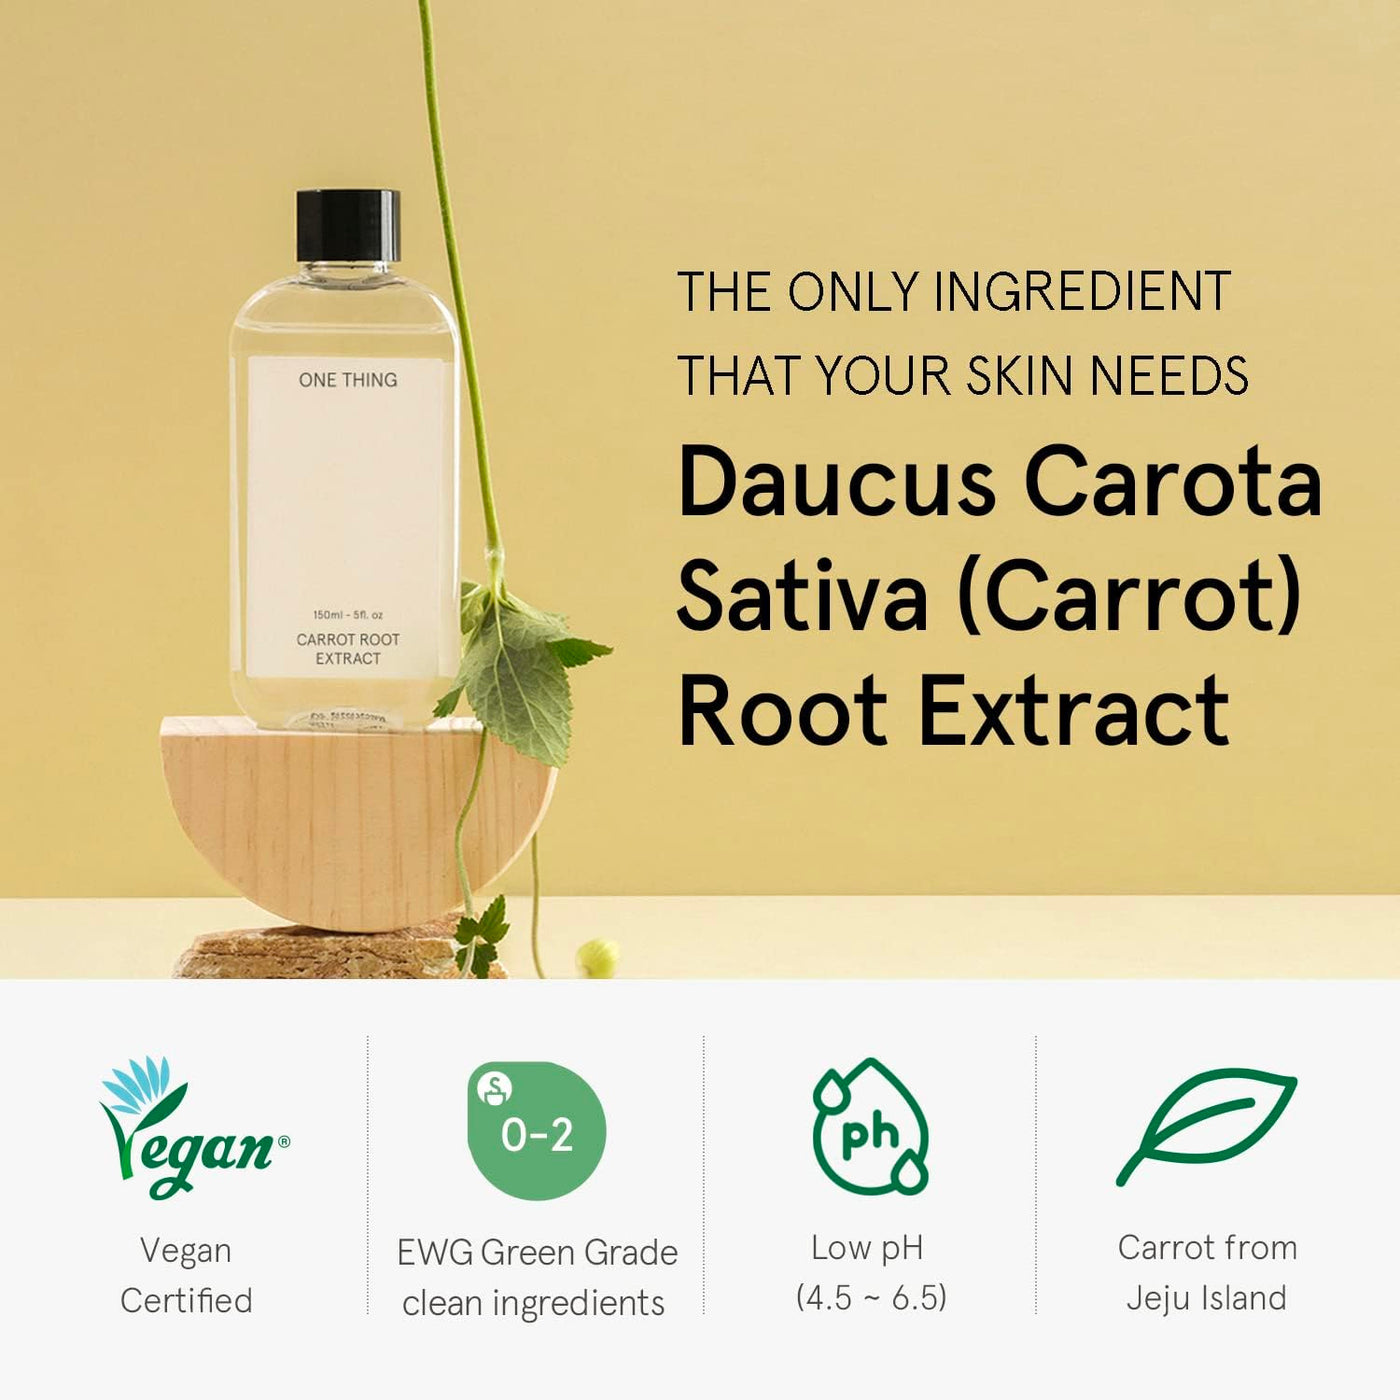 One Thing Carrot Root Extract